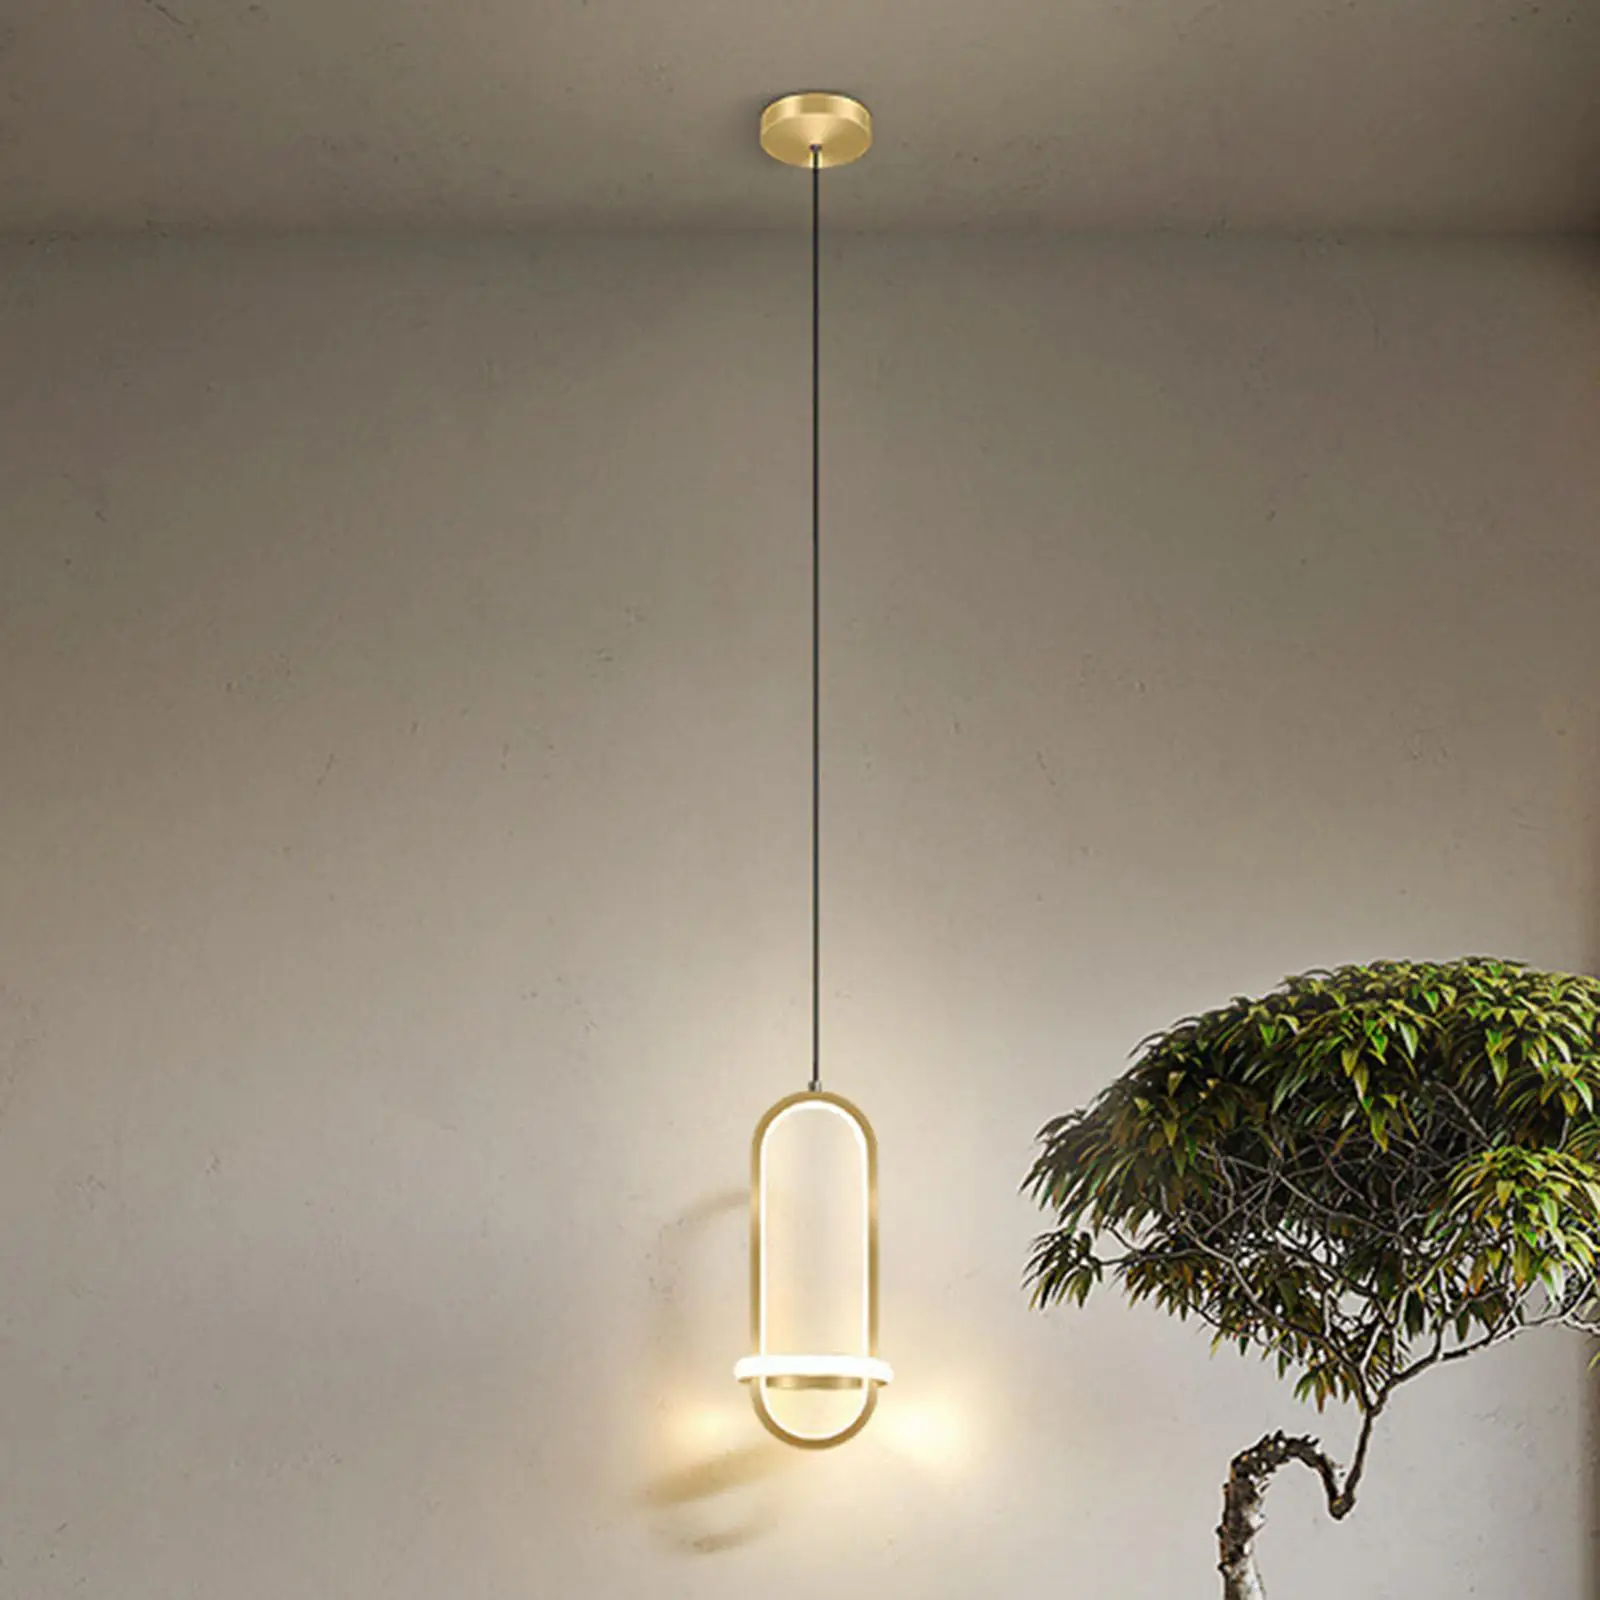 Nordic Style Hanging Pendant Lighting Pendant Light Fixture Indoor Hanging Fixture for, Farmhouse, Home, Bar Decoration